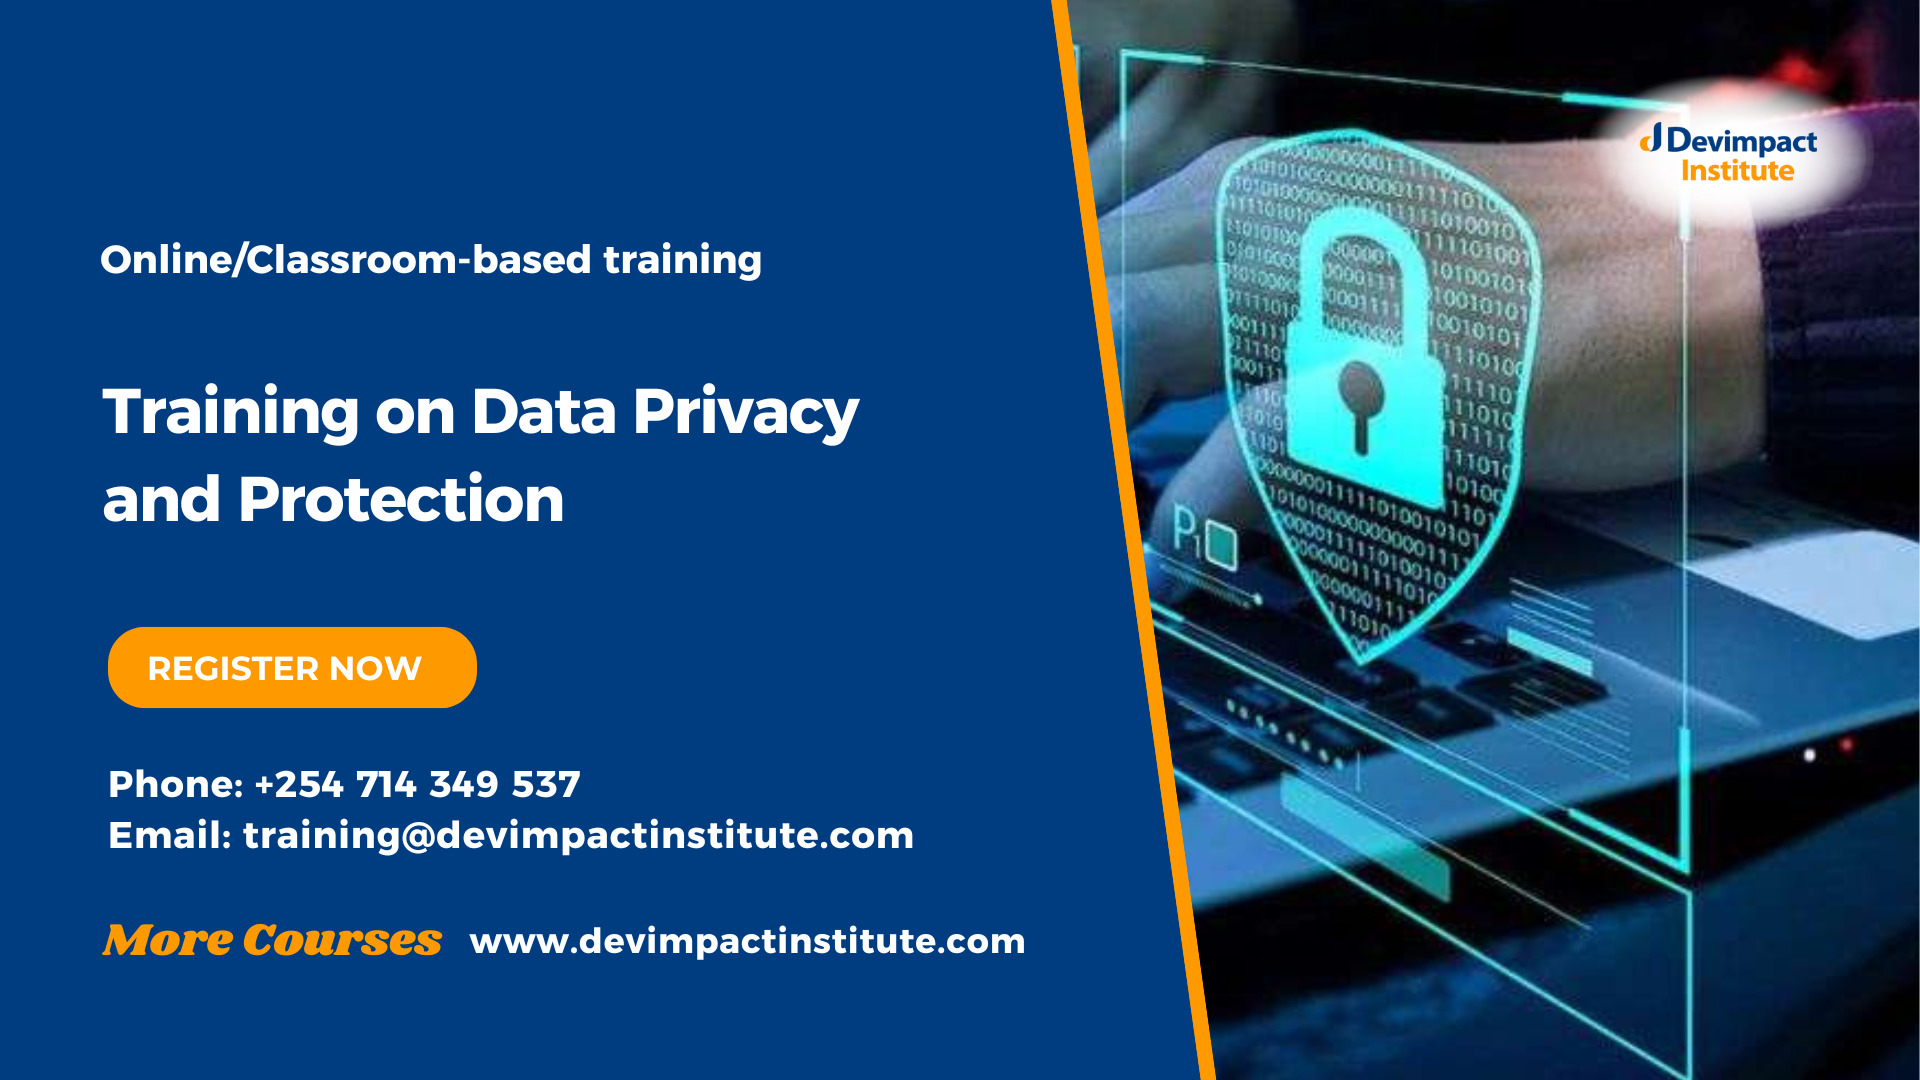 Training on Data Privacy and Protection, Devimpact Institute, Nairobi, Kenya